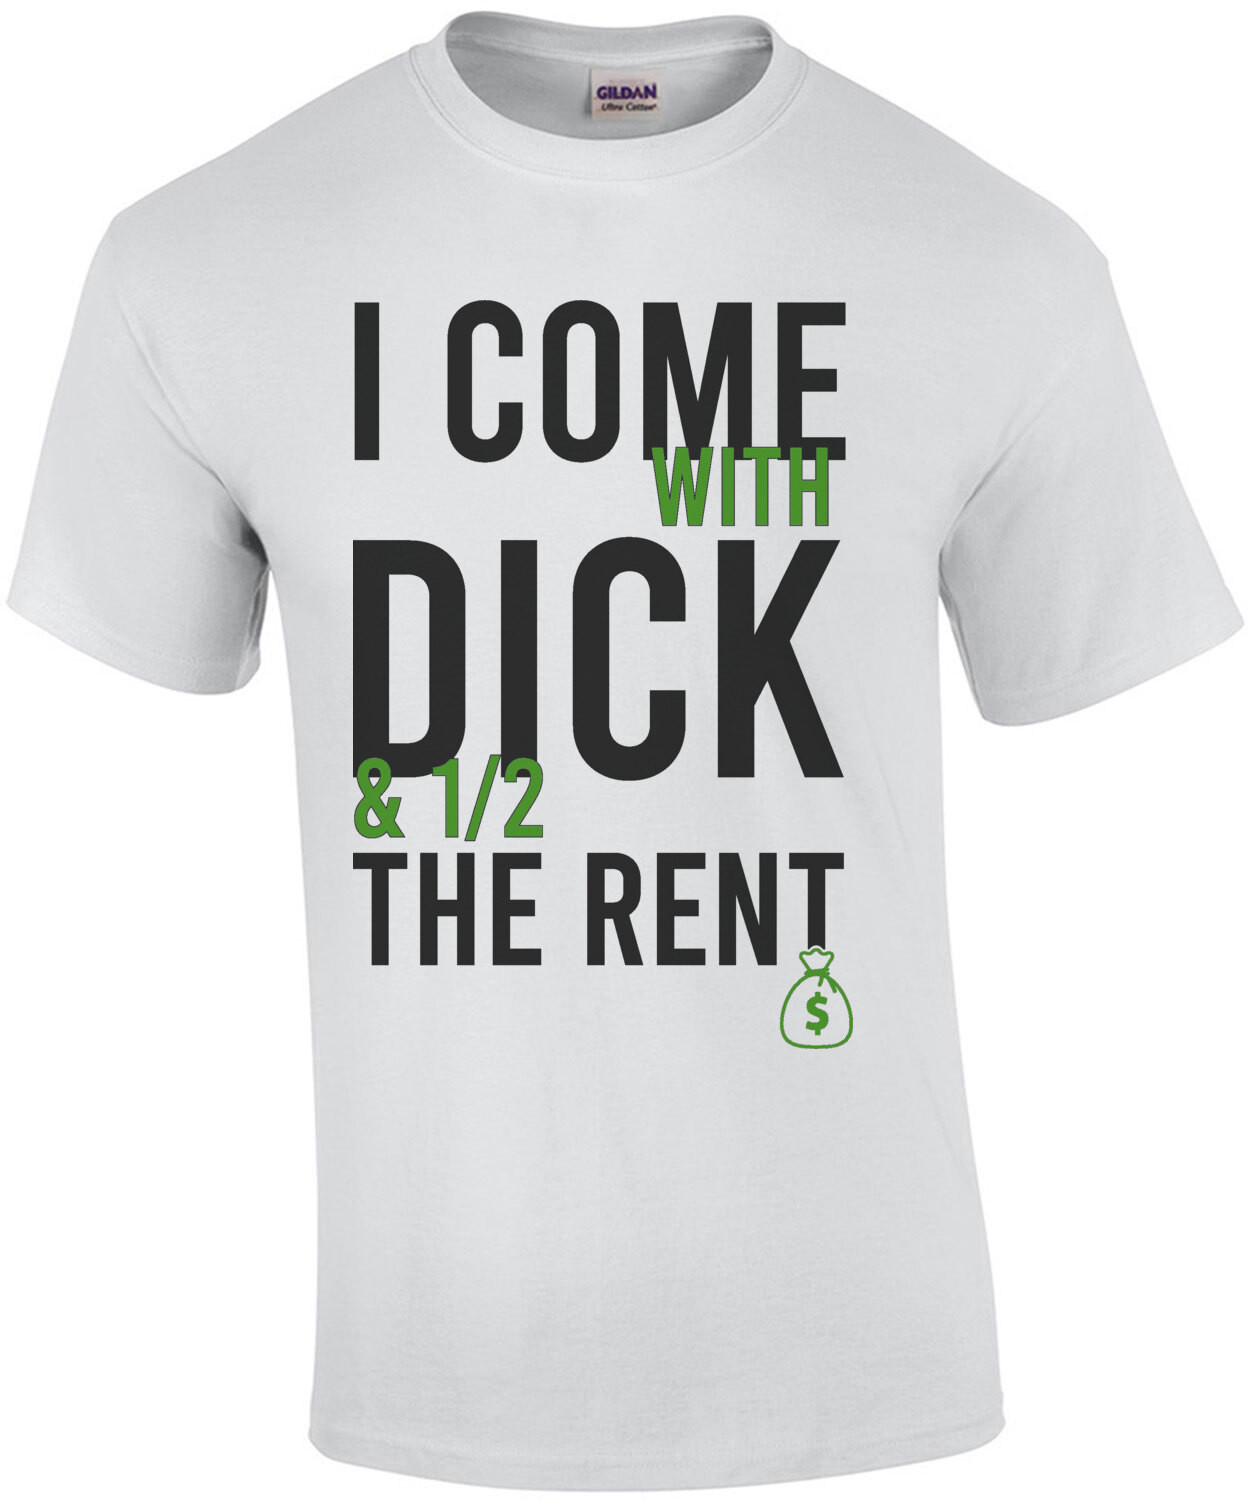 I come with dick and 1/2 the rent - funny t-shirt